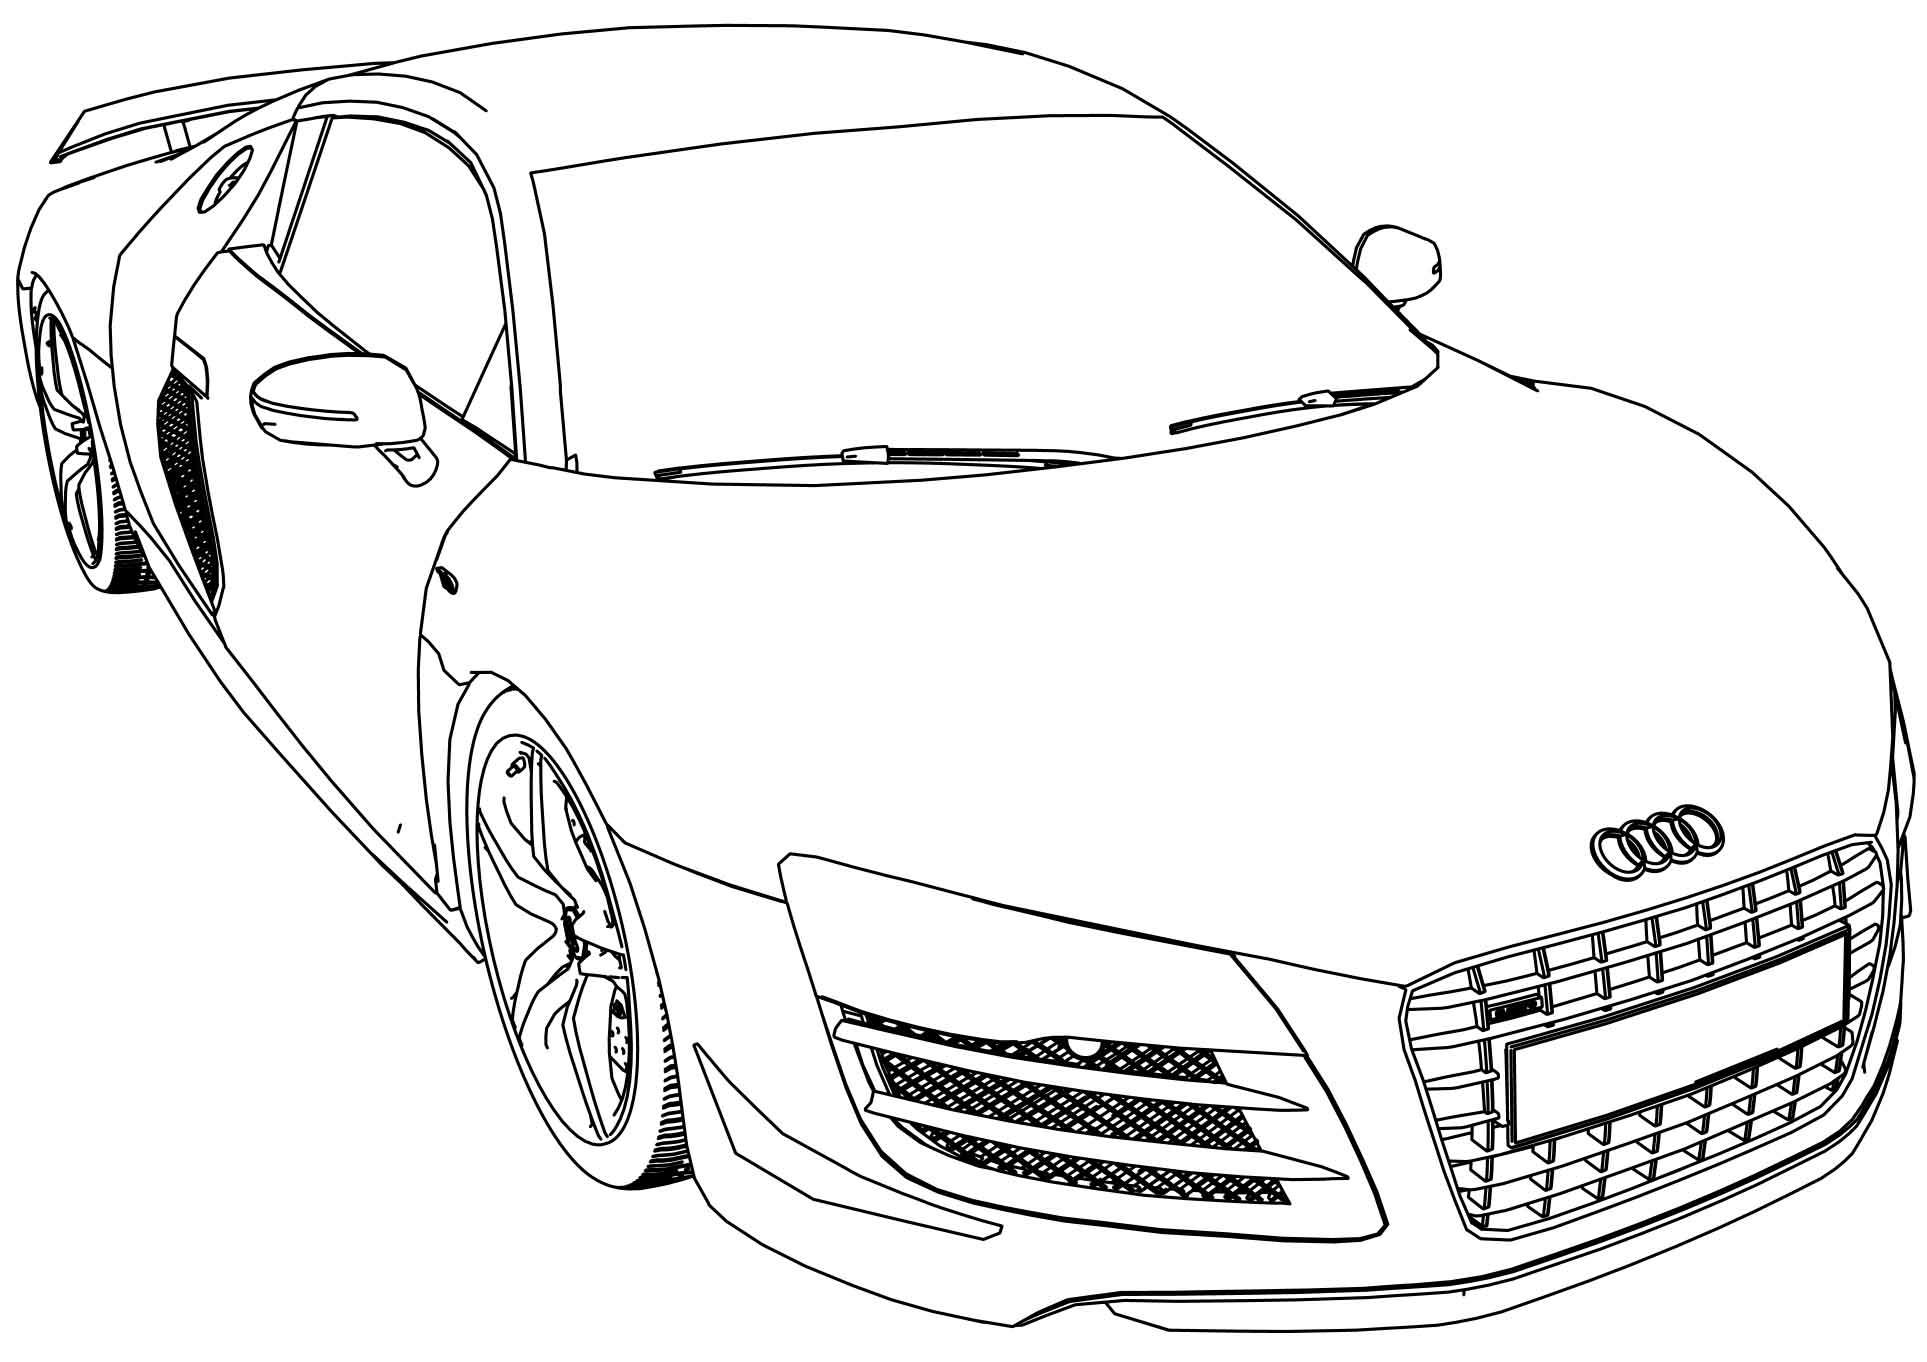 audi a4 coloring pages